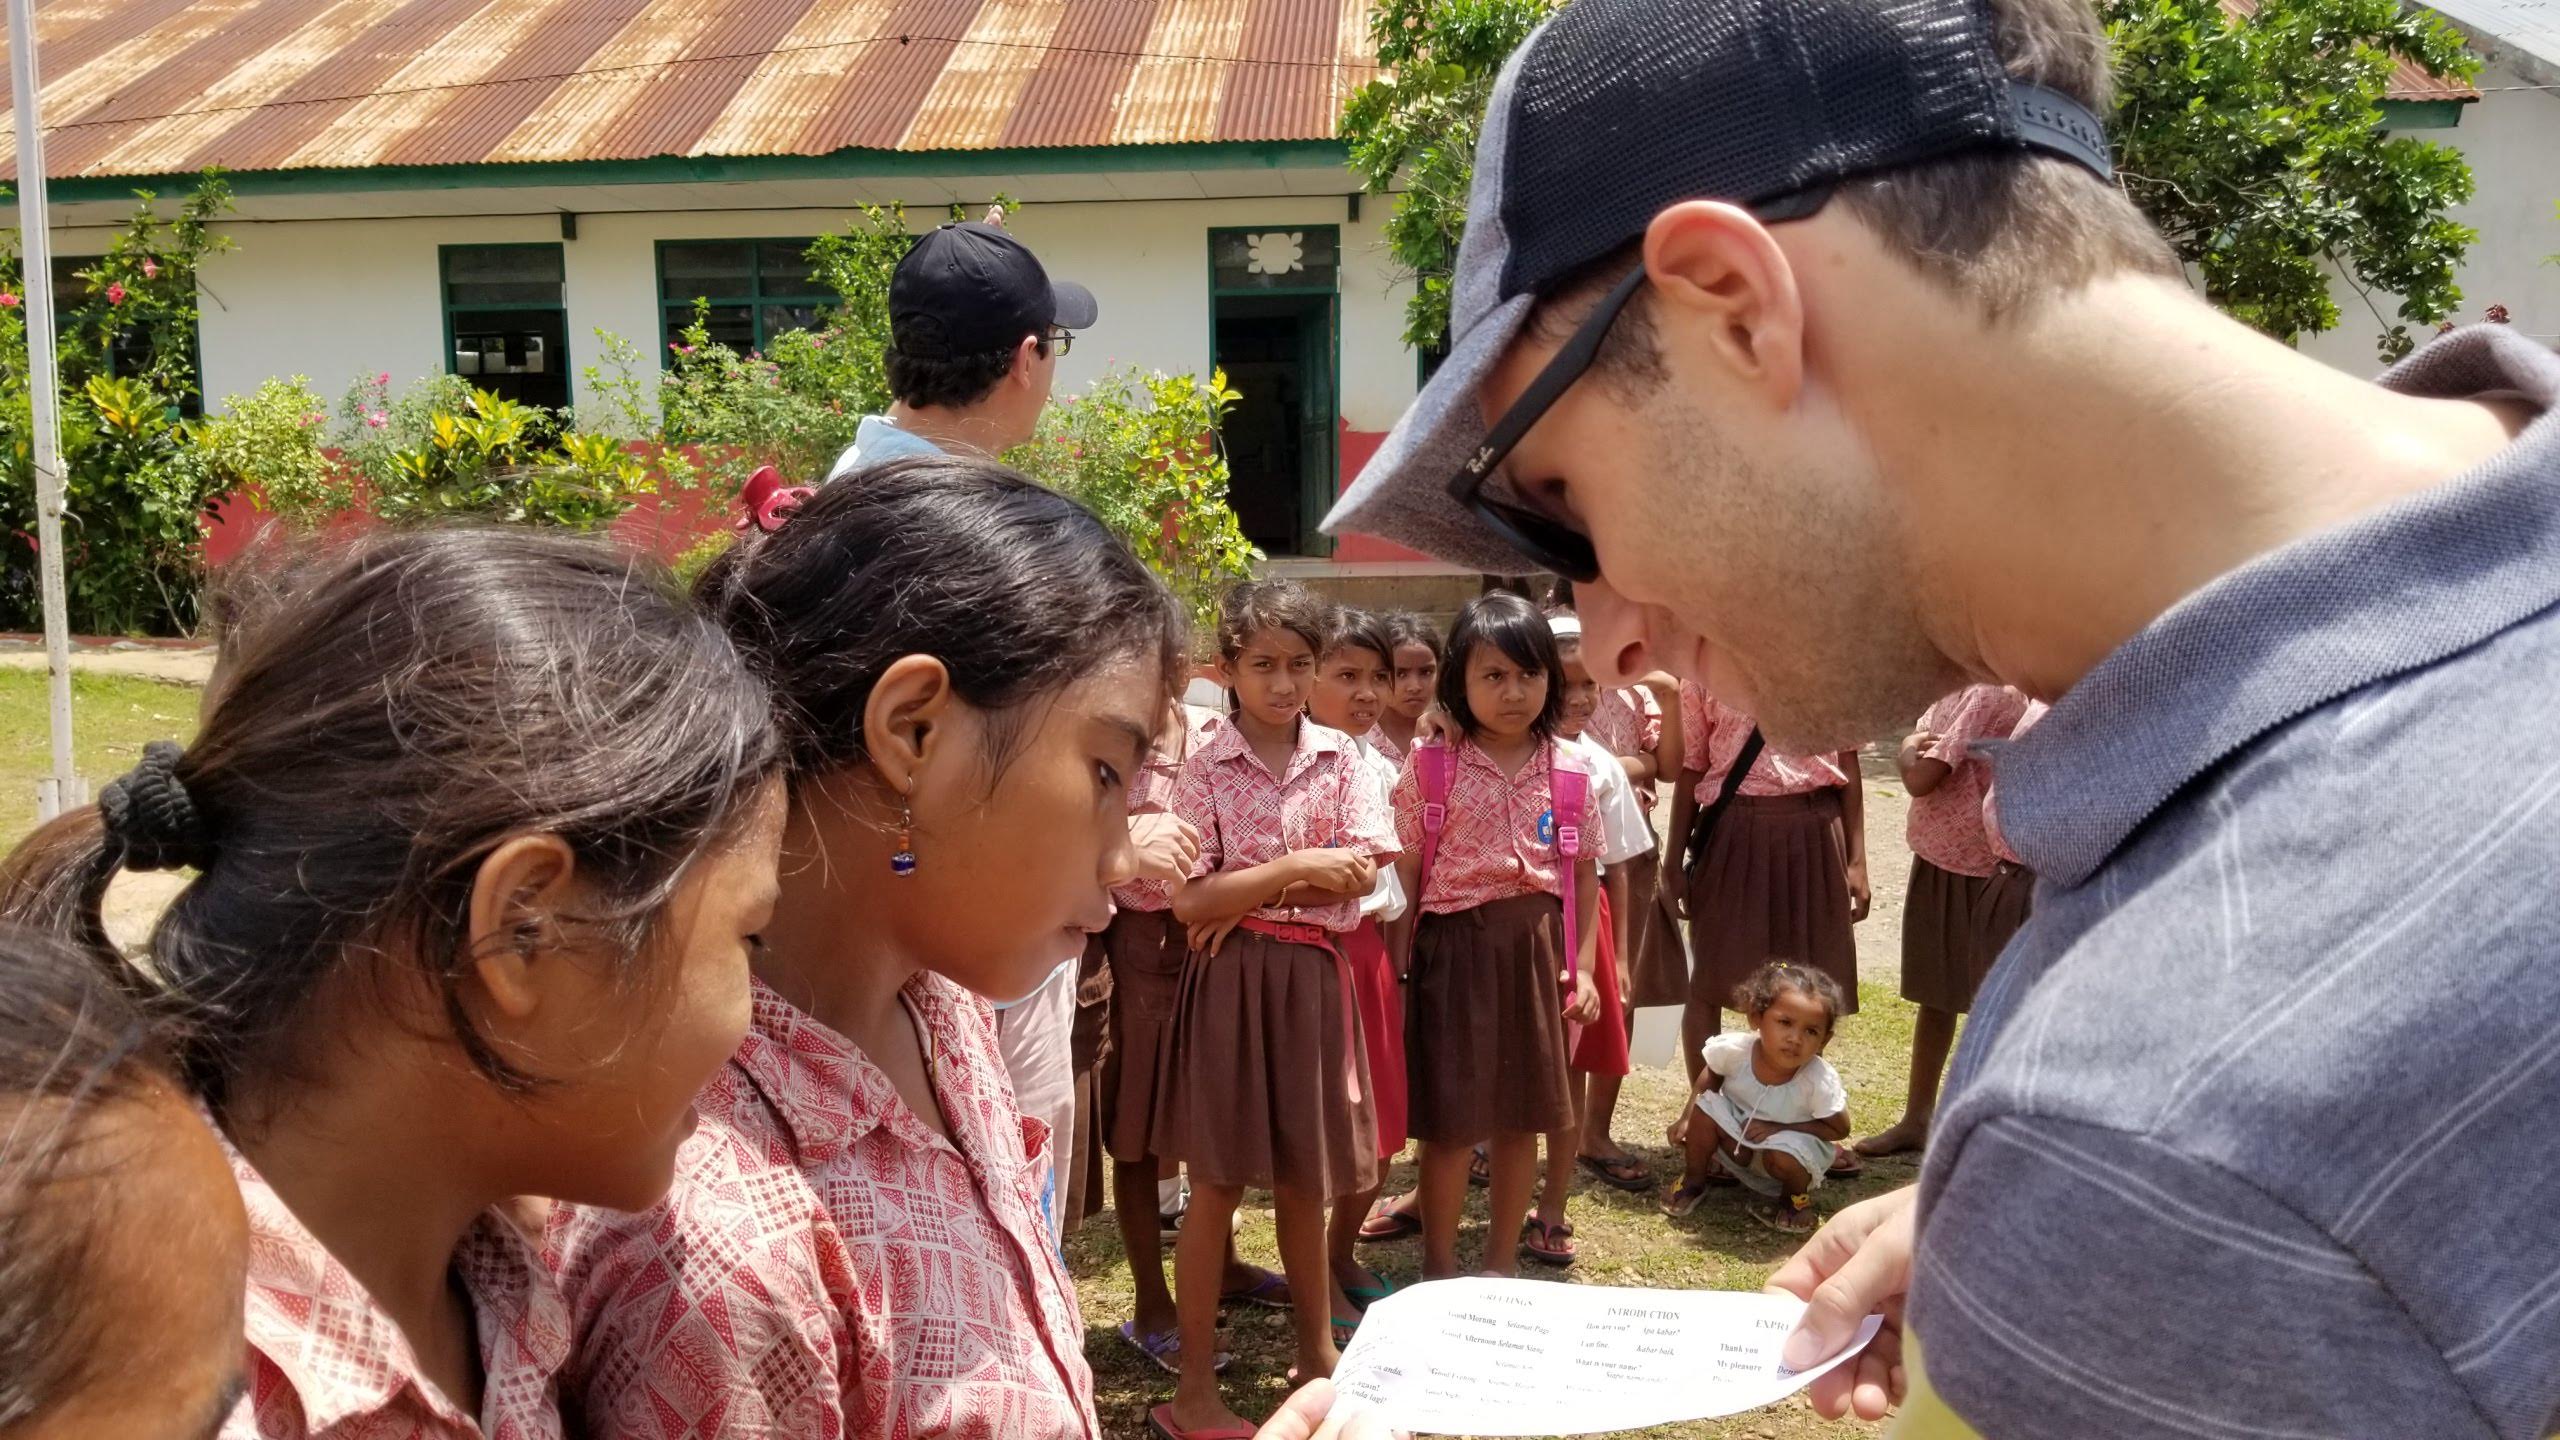 Jason chatting with the kids in English and Bahasa